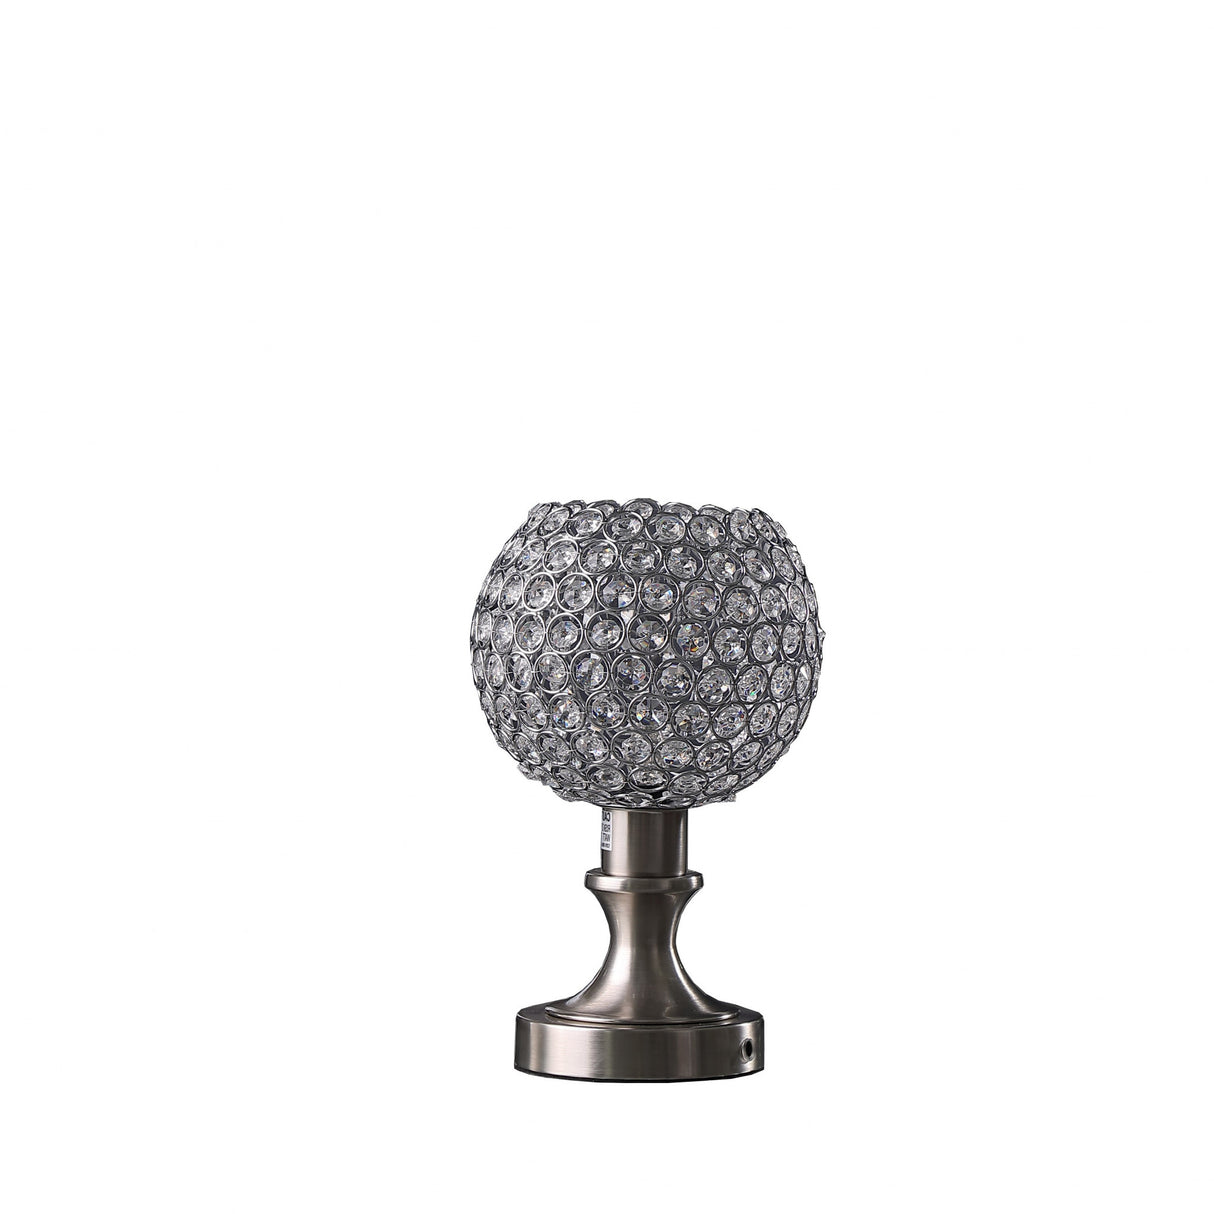 12" Silver Globe Led Table Lamp With Clear Globe Shade